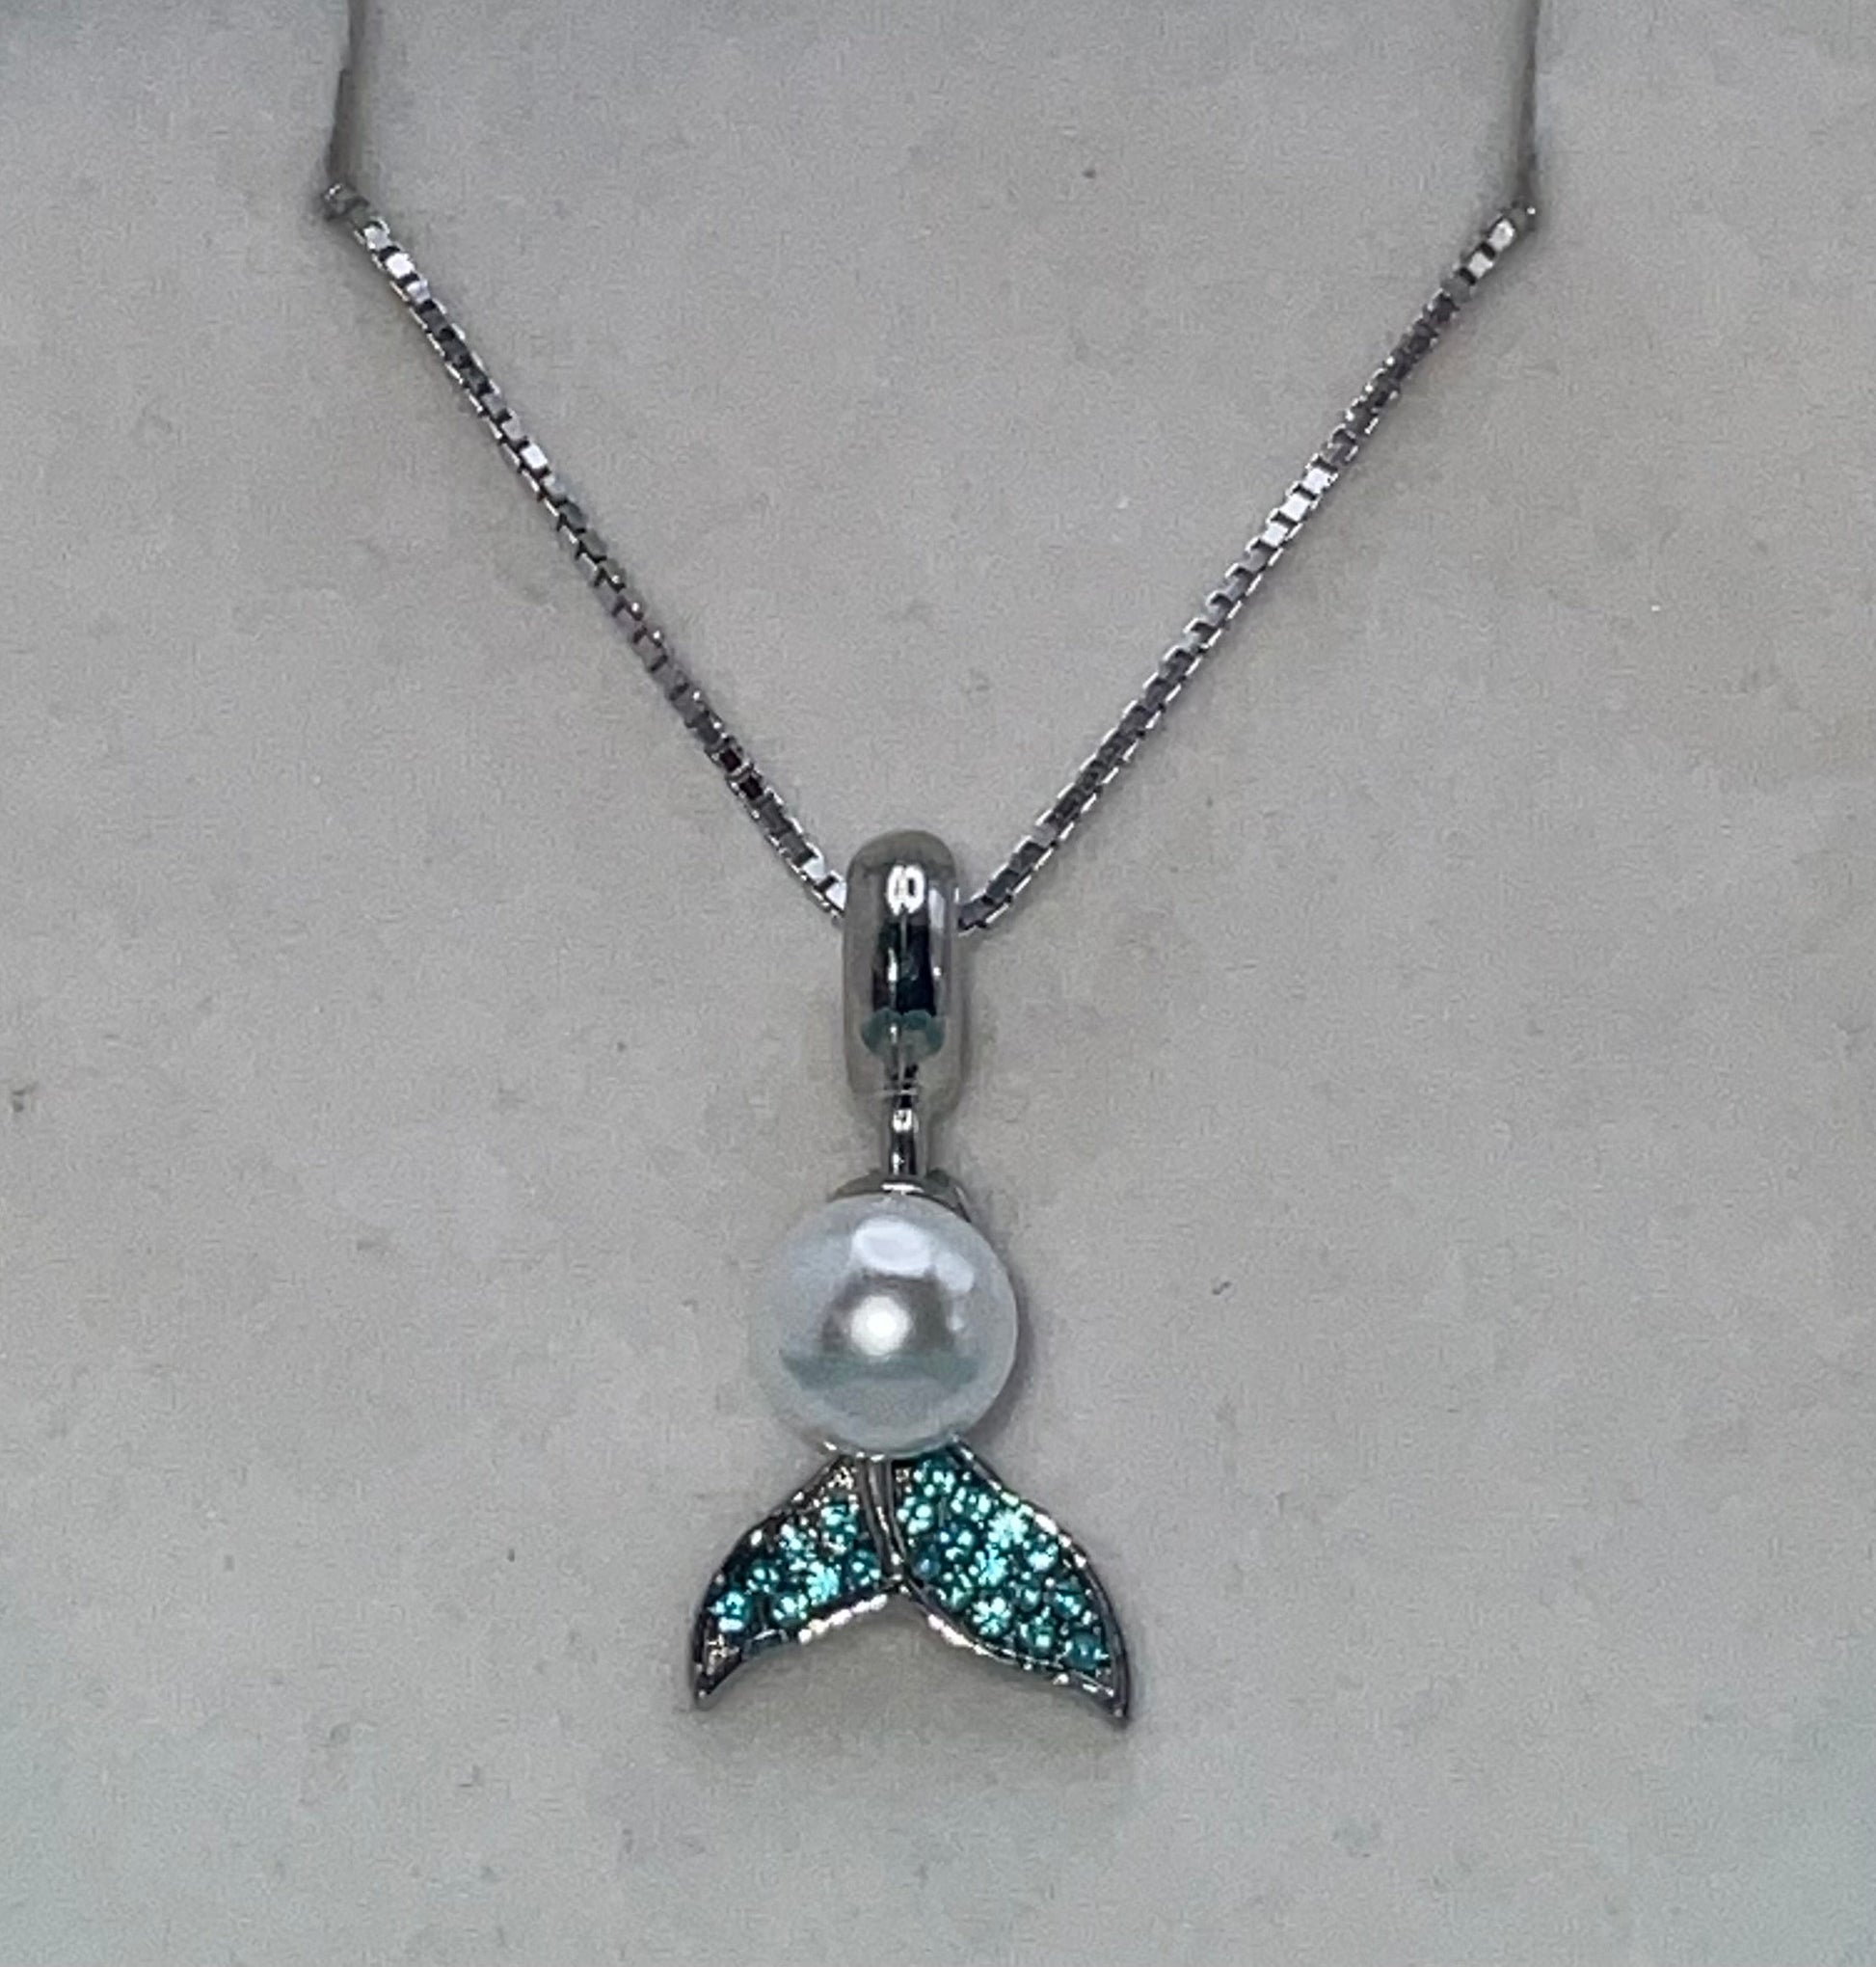 Aqua March Birthstone Aquamarine Blue Mermaid Tail with Pearl Accent Necklace Pendant on an 18” Sterling Silver Box Chain